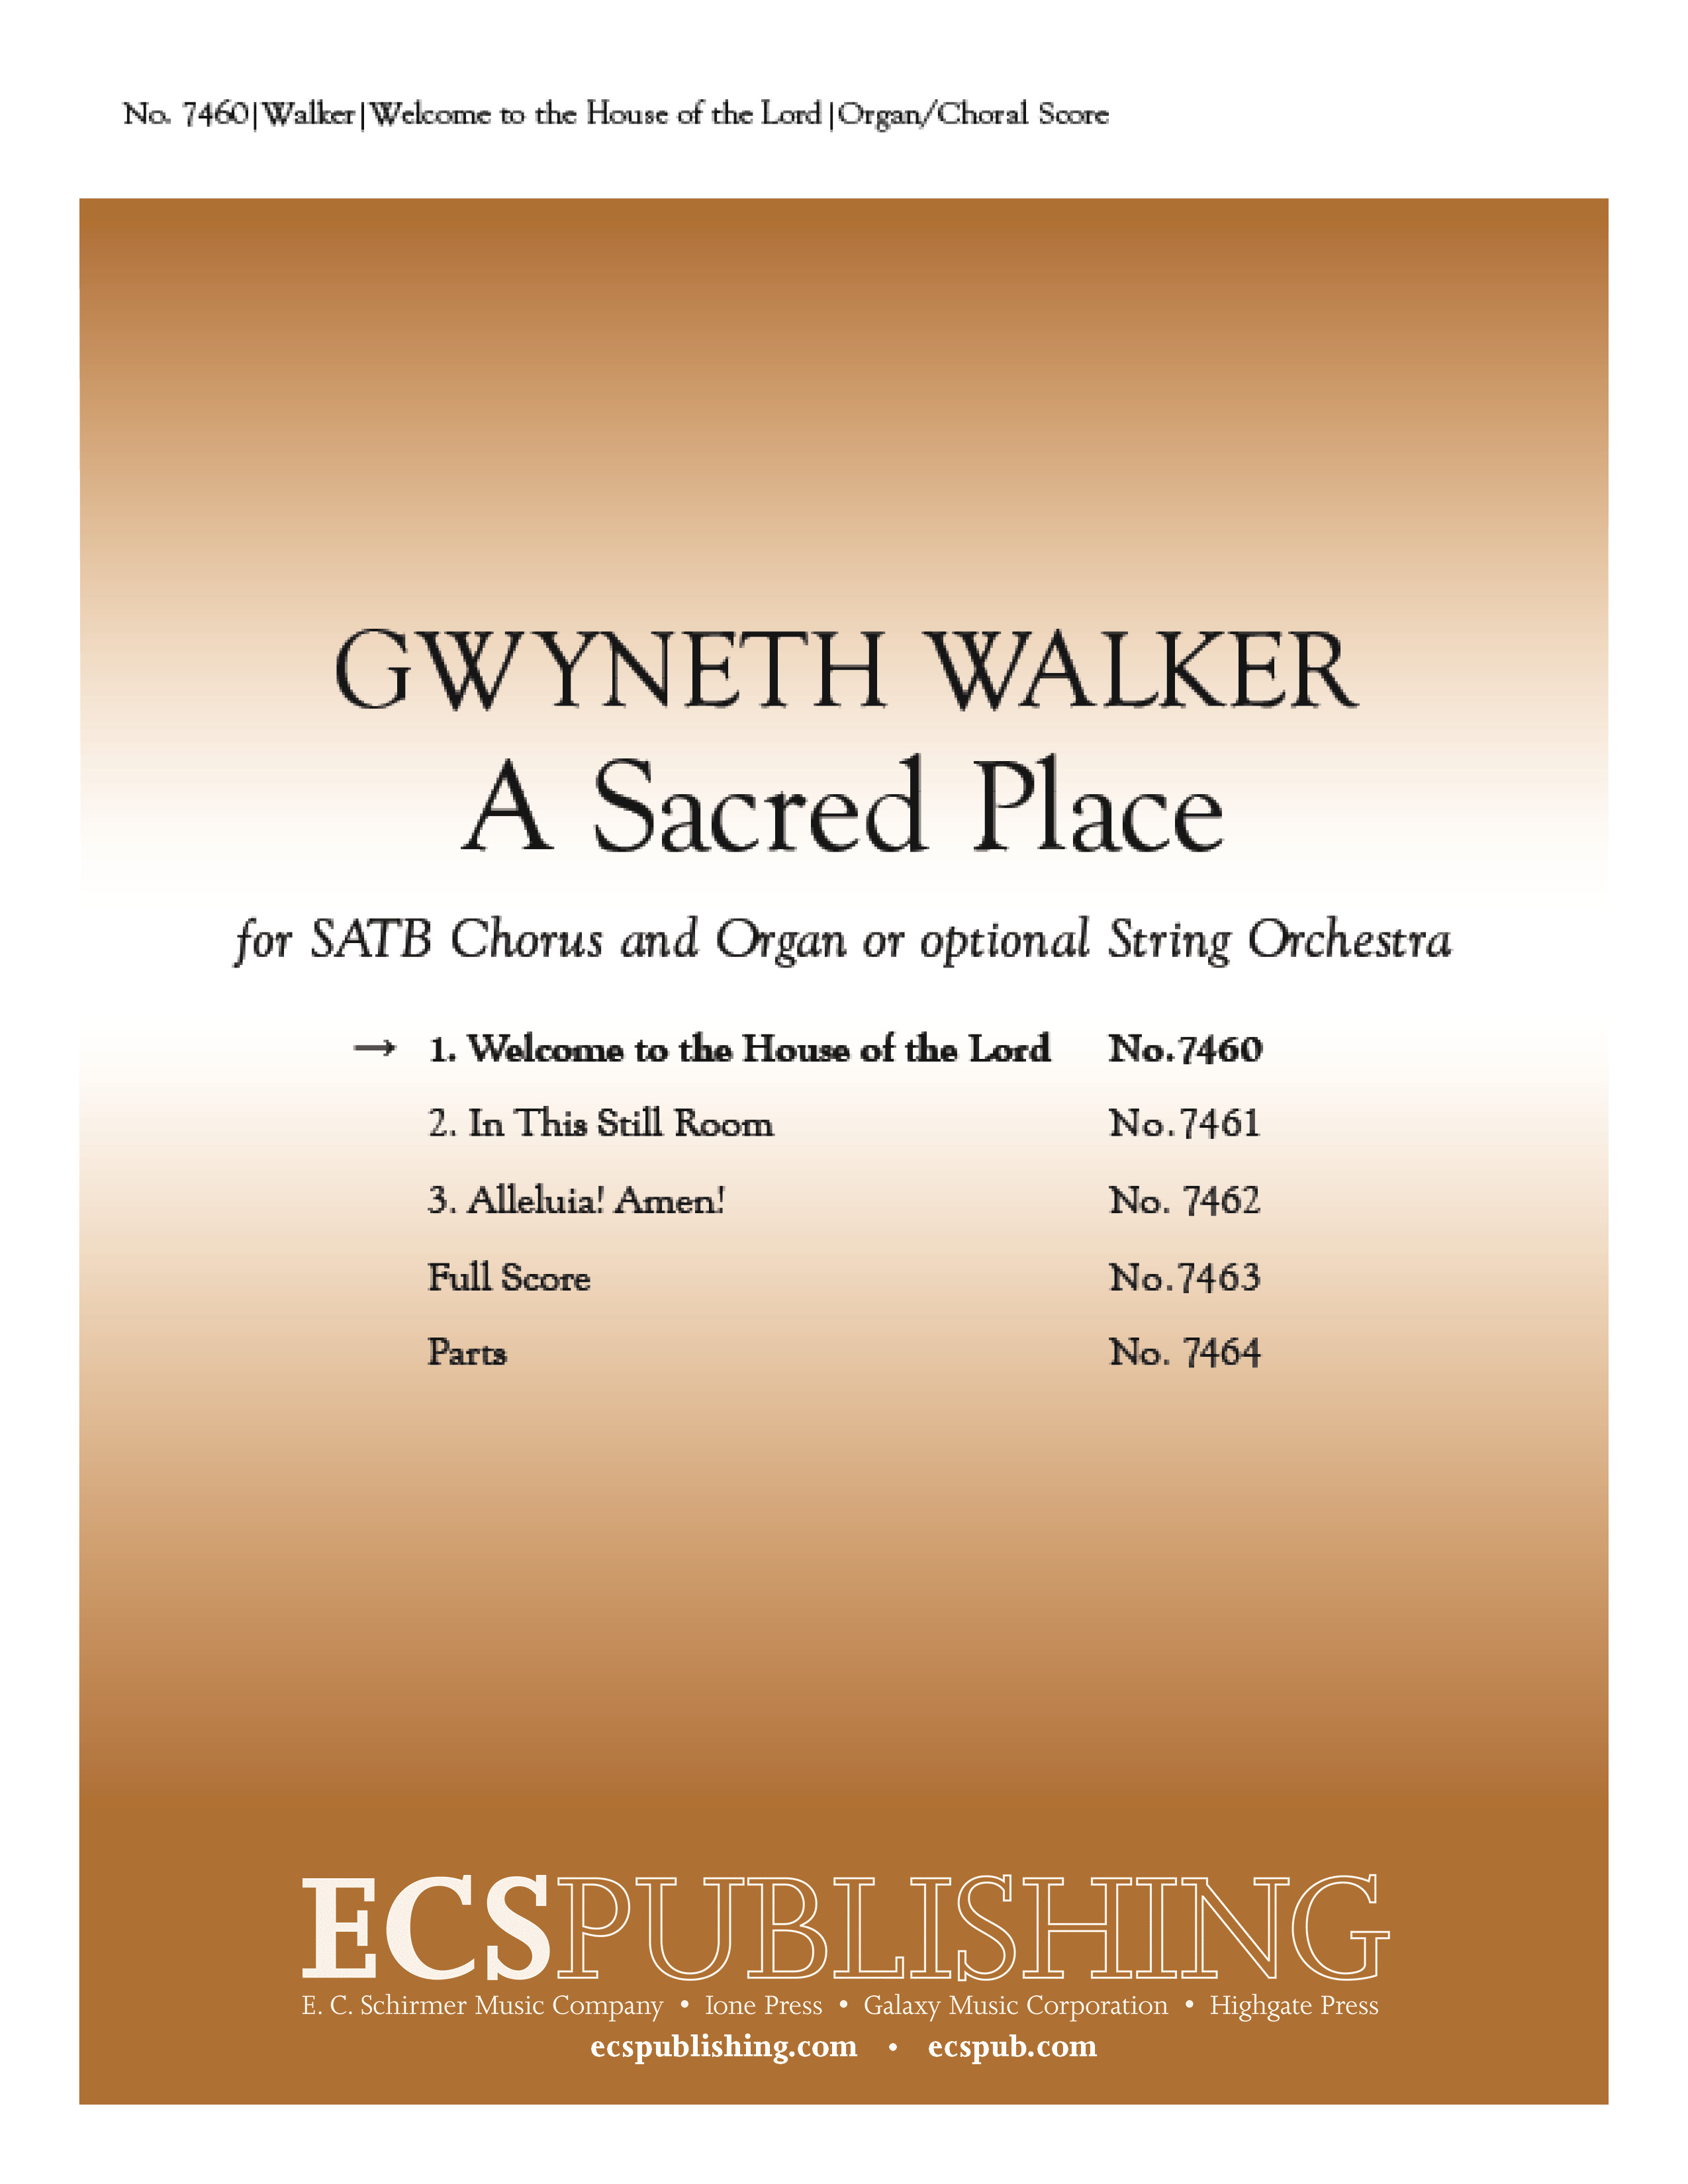 A Sacred Place: 1. Welcome to the House of the Lord : SATB : Gwyneth Walker : Gwyneth Walker : 7460